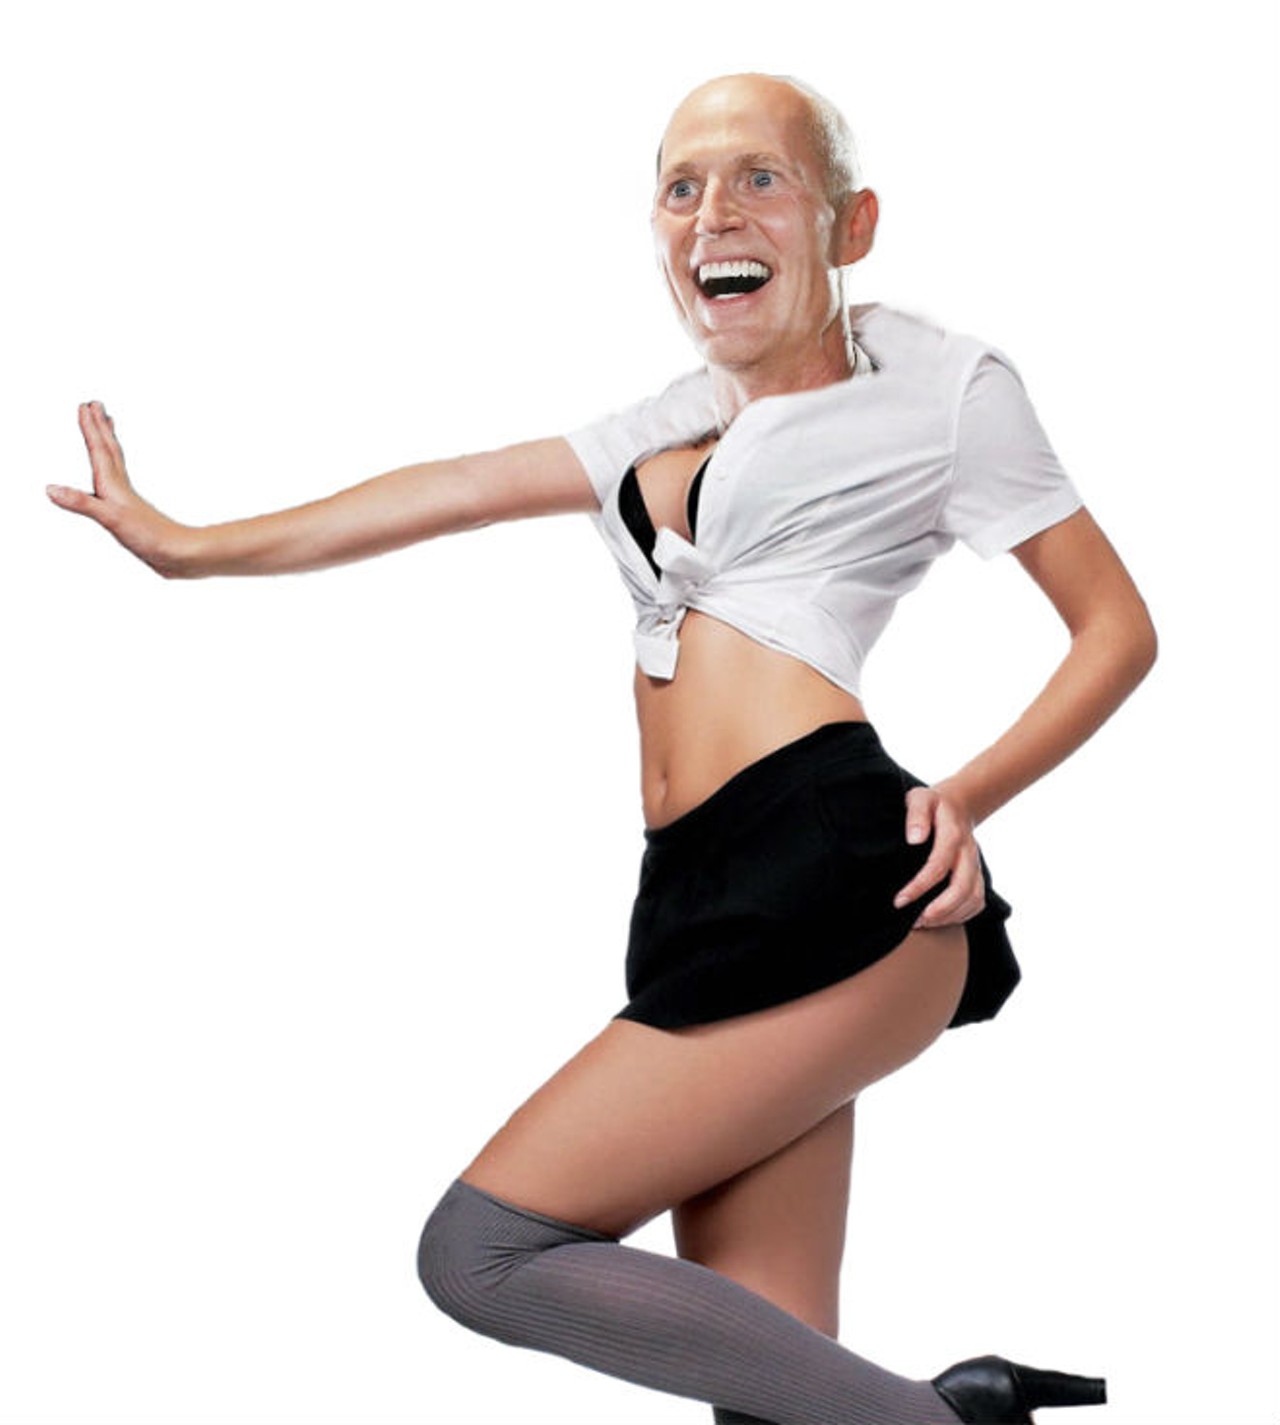 Trick Scott
If you're looking for something a little sexier, then why not go out as Florida governor Rick Scott's wild, inner self, Trick Scott? Trick Scott loves to party and he's stripping his way through college.